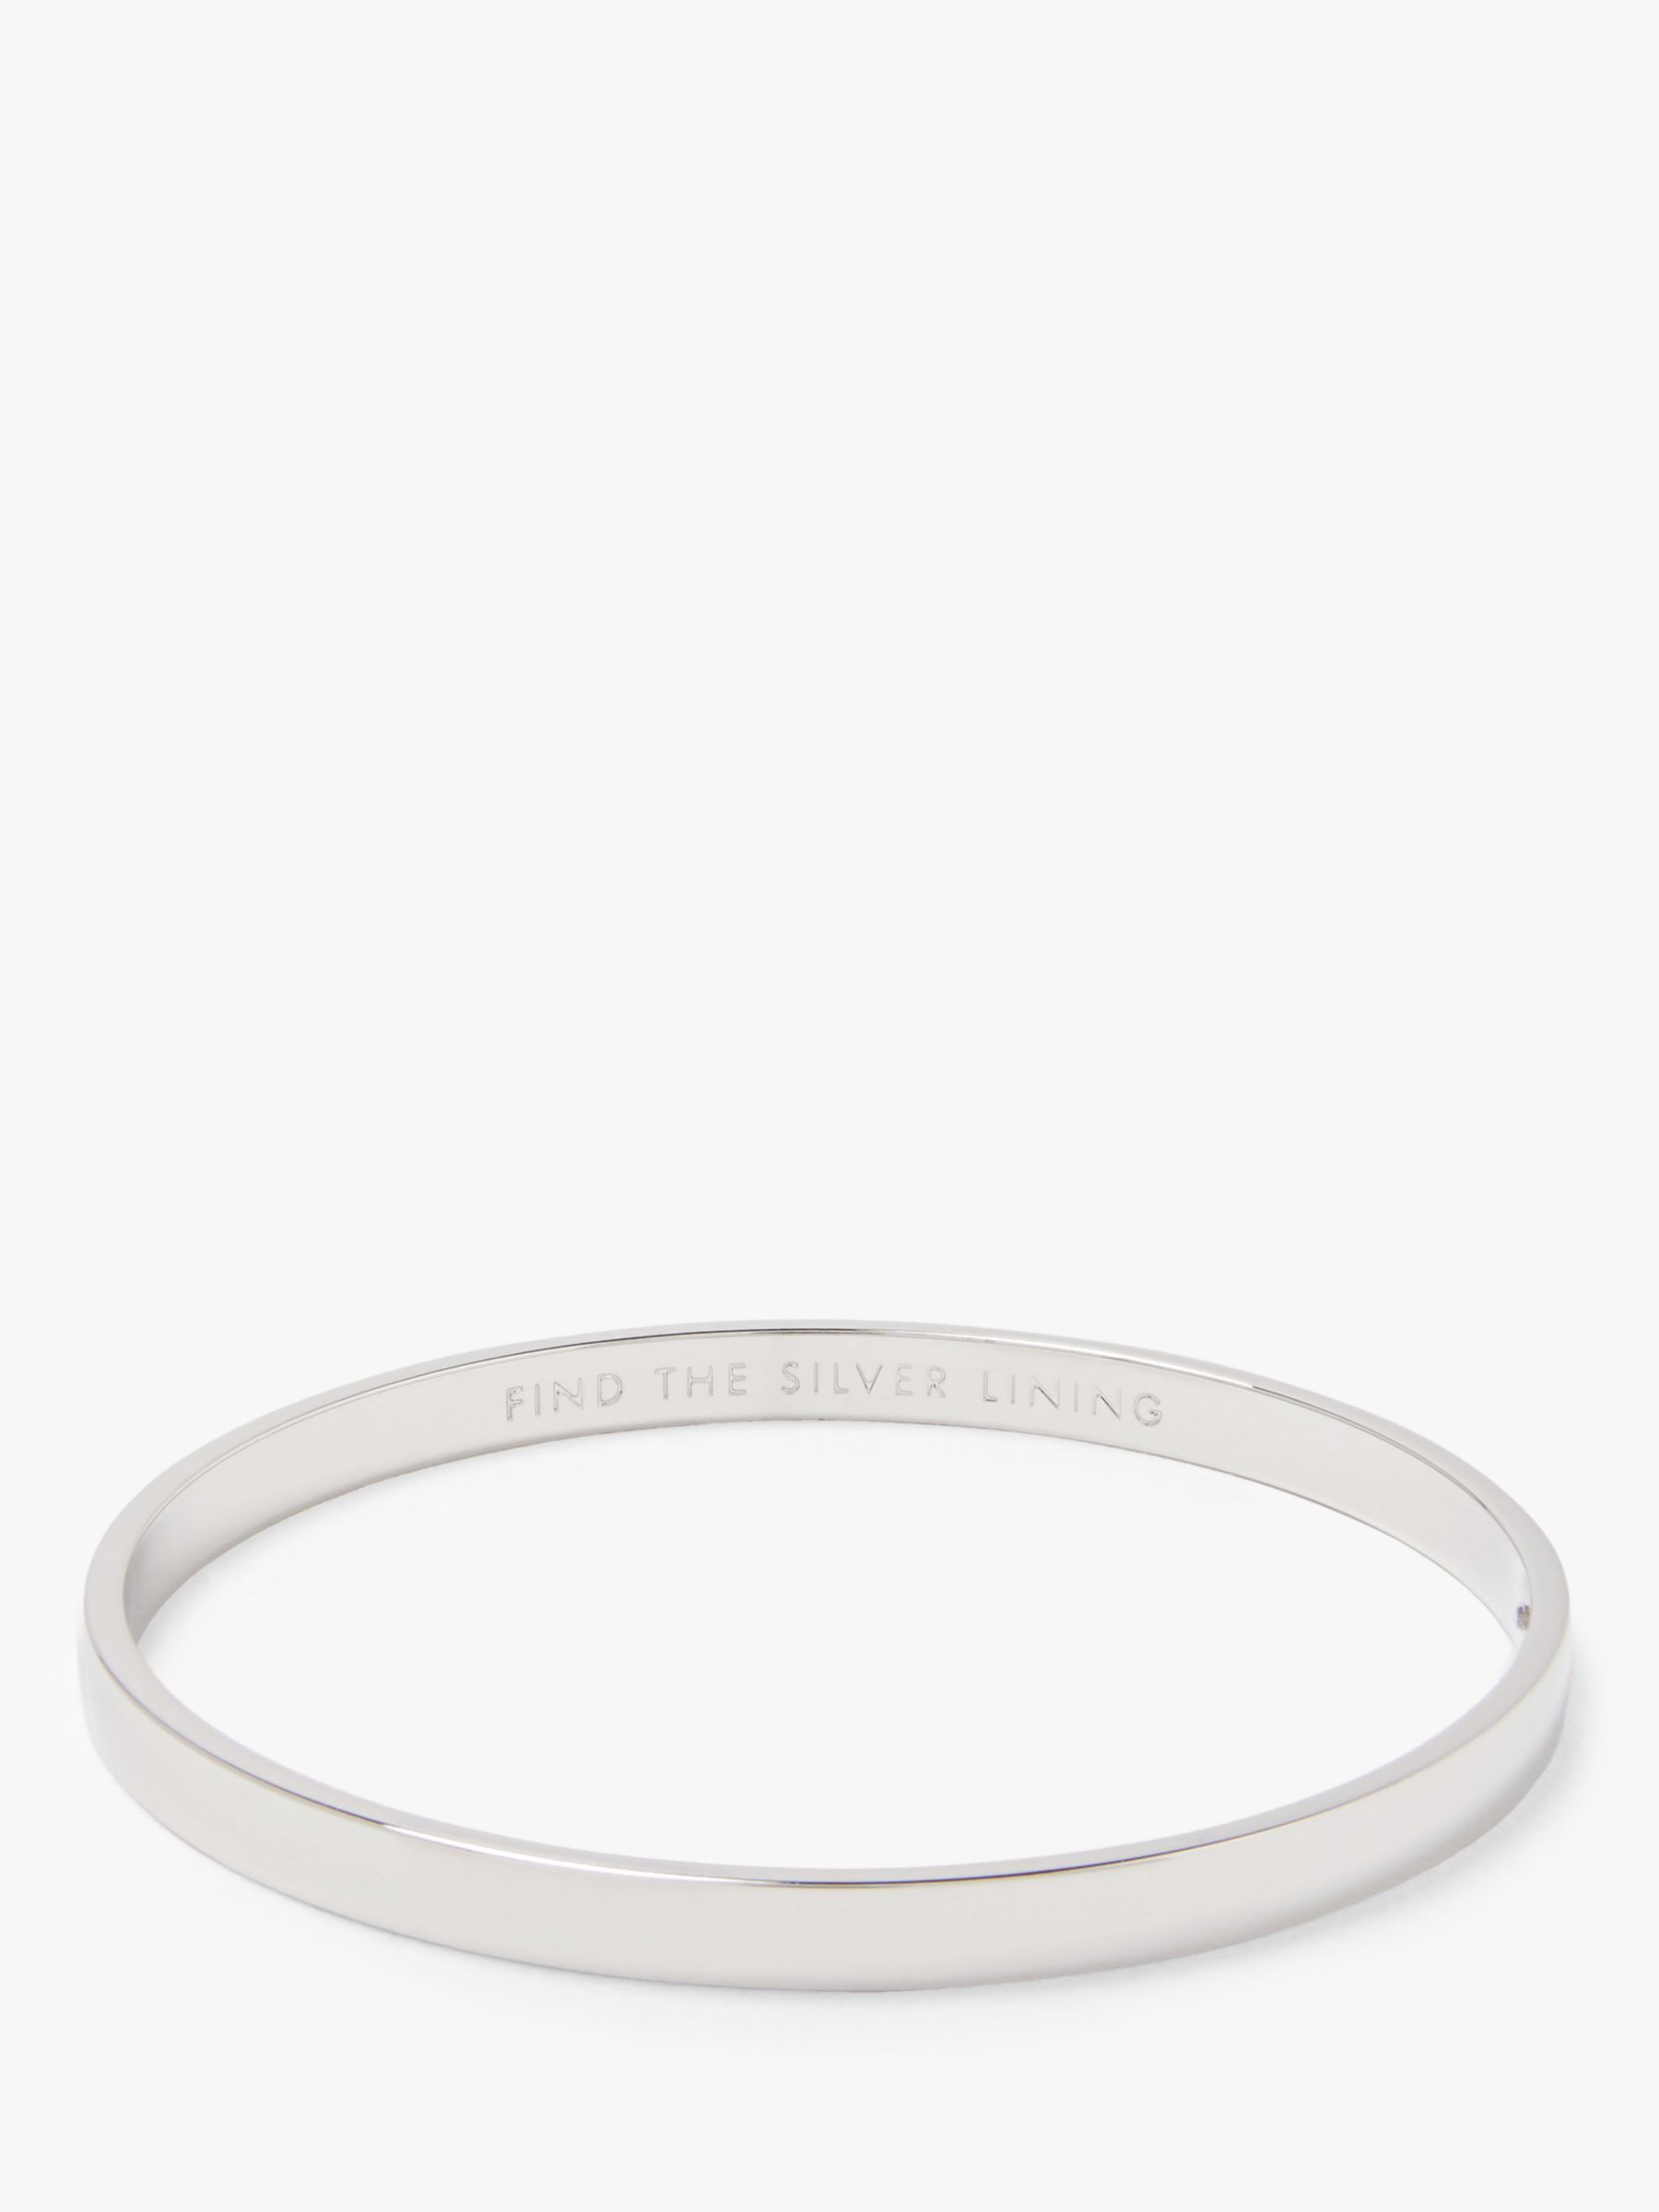 kate spade new york Find The Silver Lining Bangle, Silver at John Lewis ...